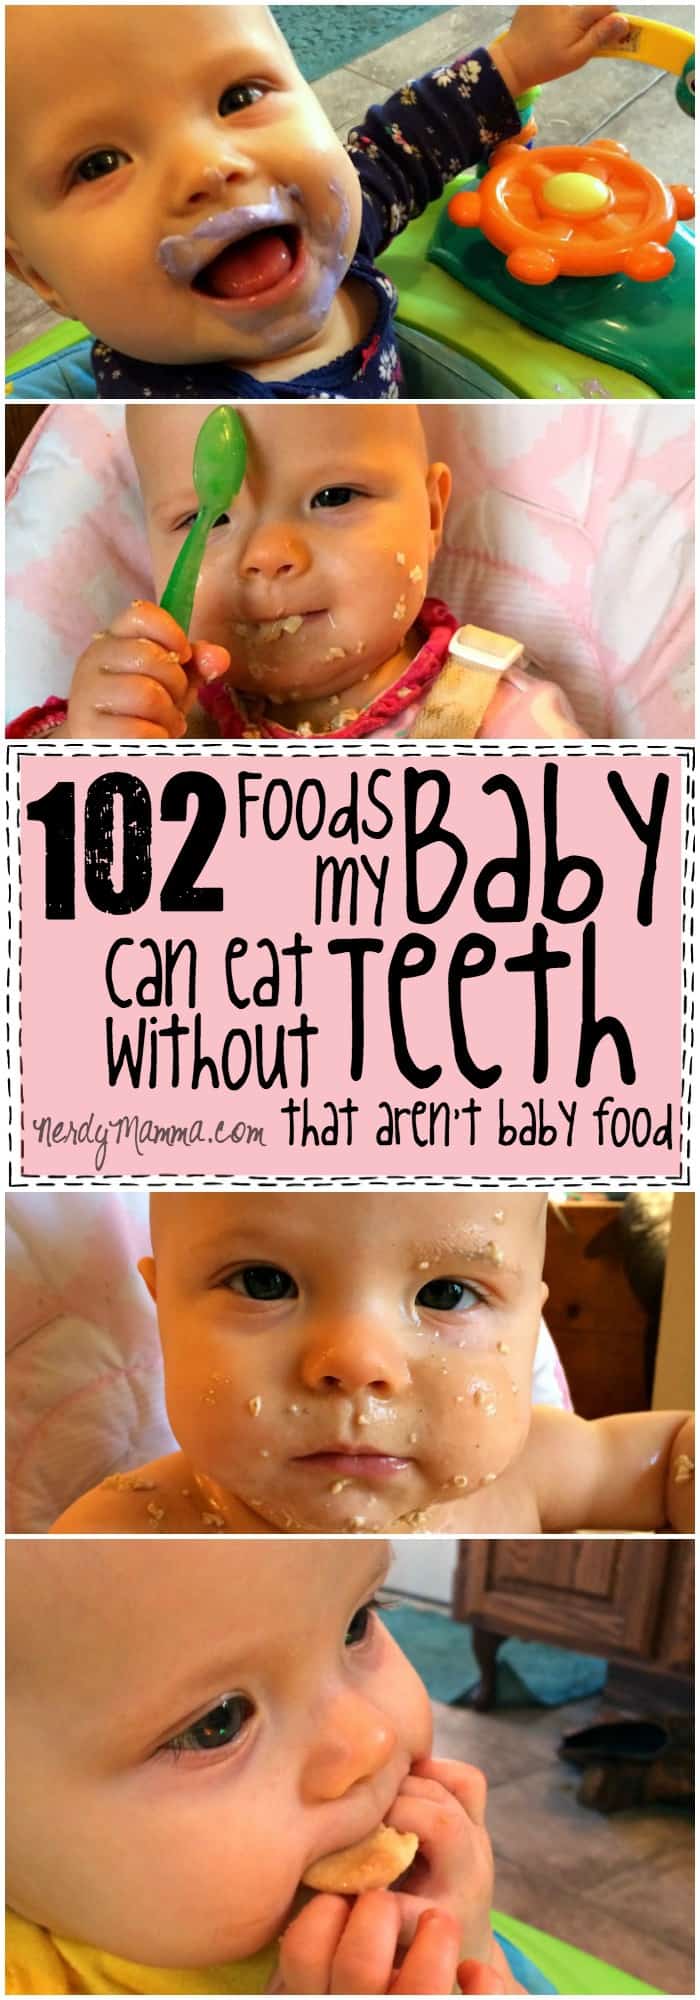 Wow! This list of 102 Different food ideas for babies without teeth is pretty awesome. I didn't know they could eat all that before they got their first tooth! LOL!